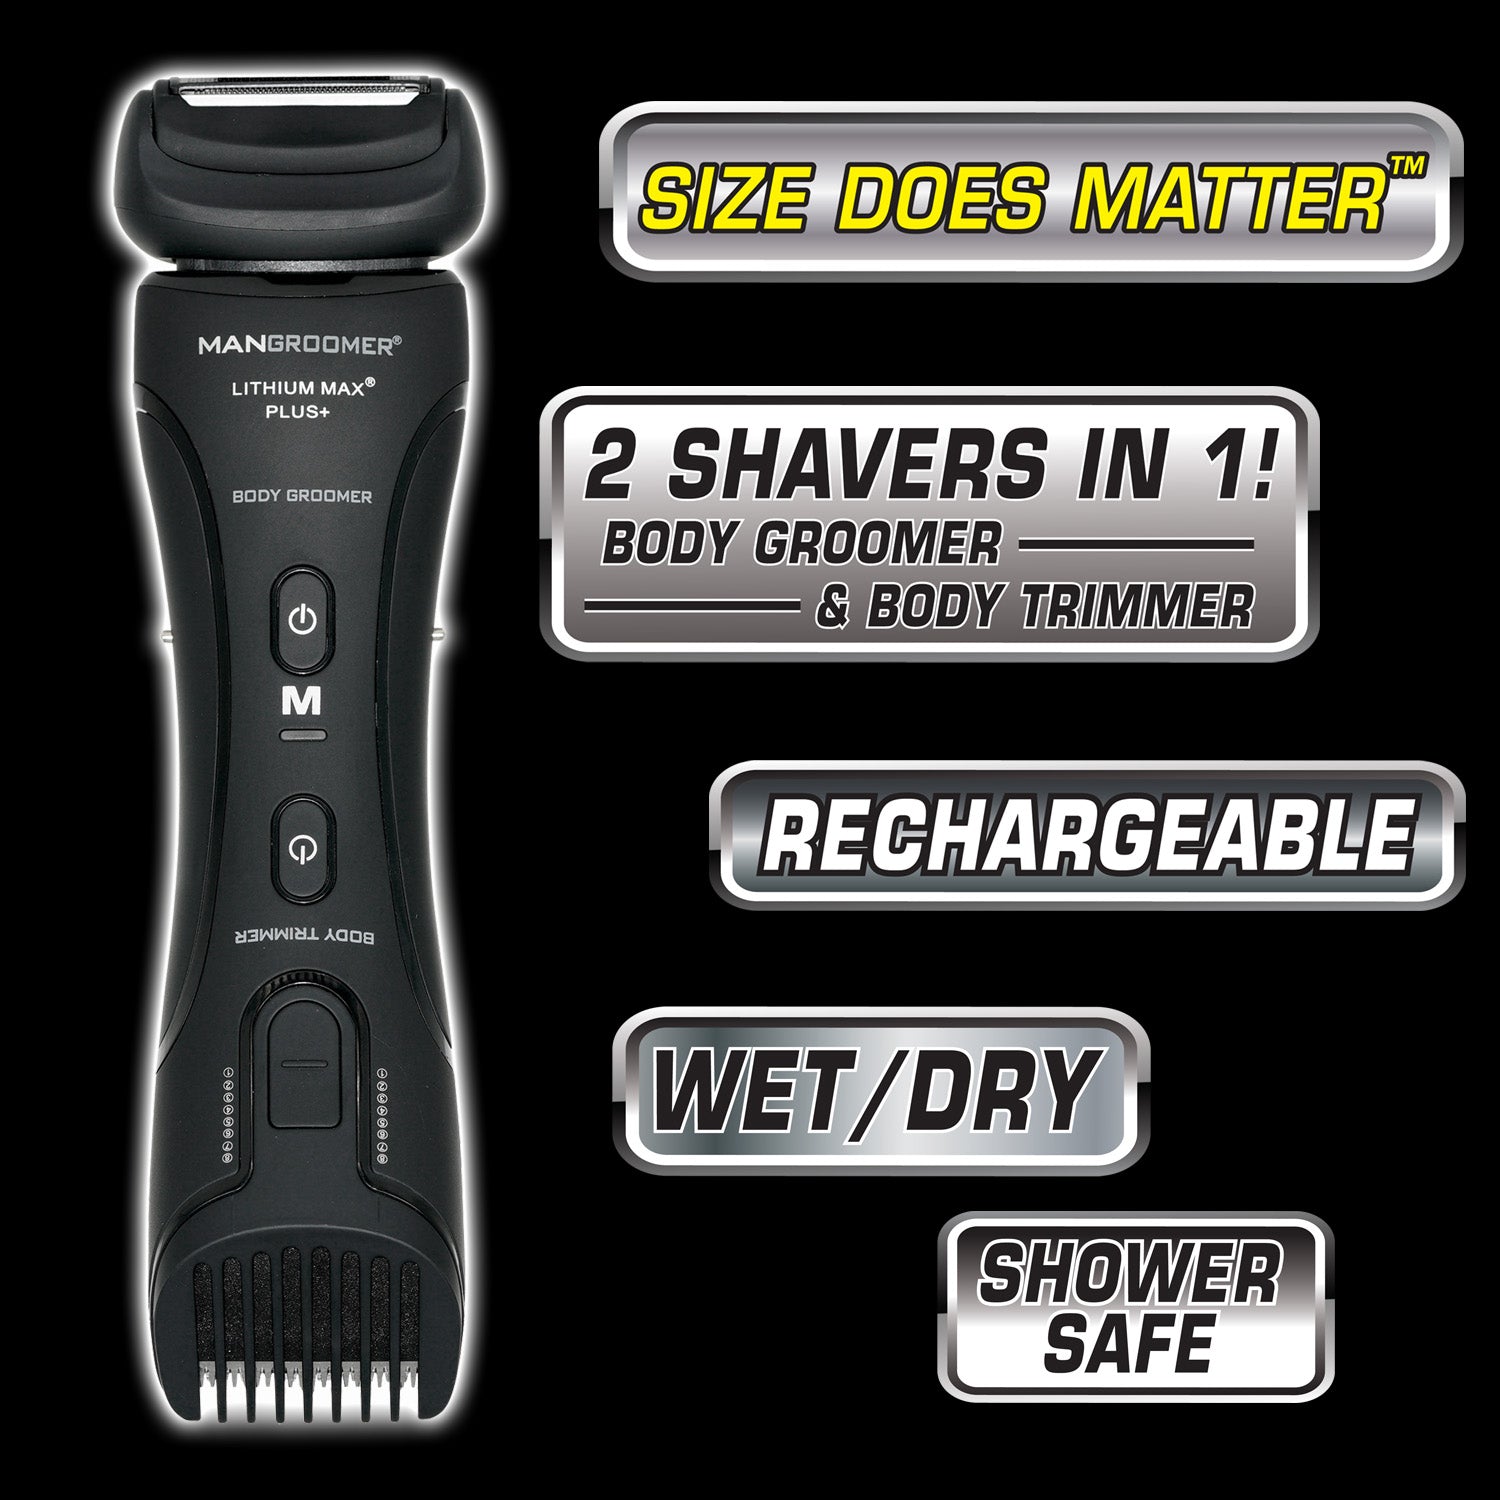 LITHIUM MAX PLUS+ Body Groomer and Body Trimmer